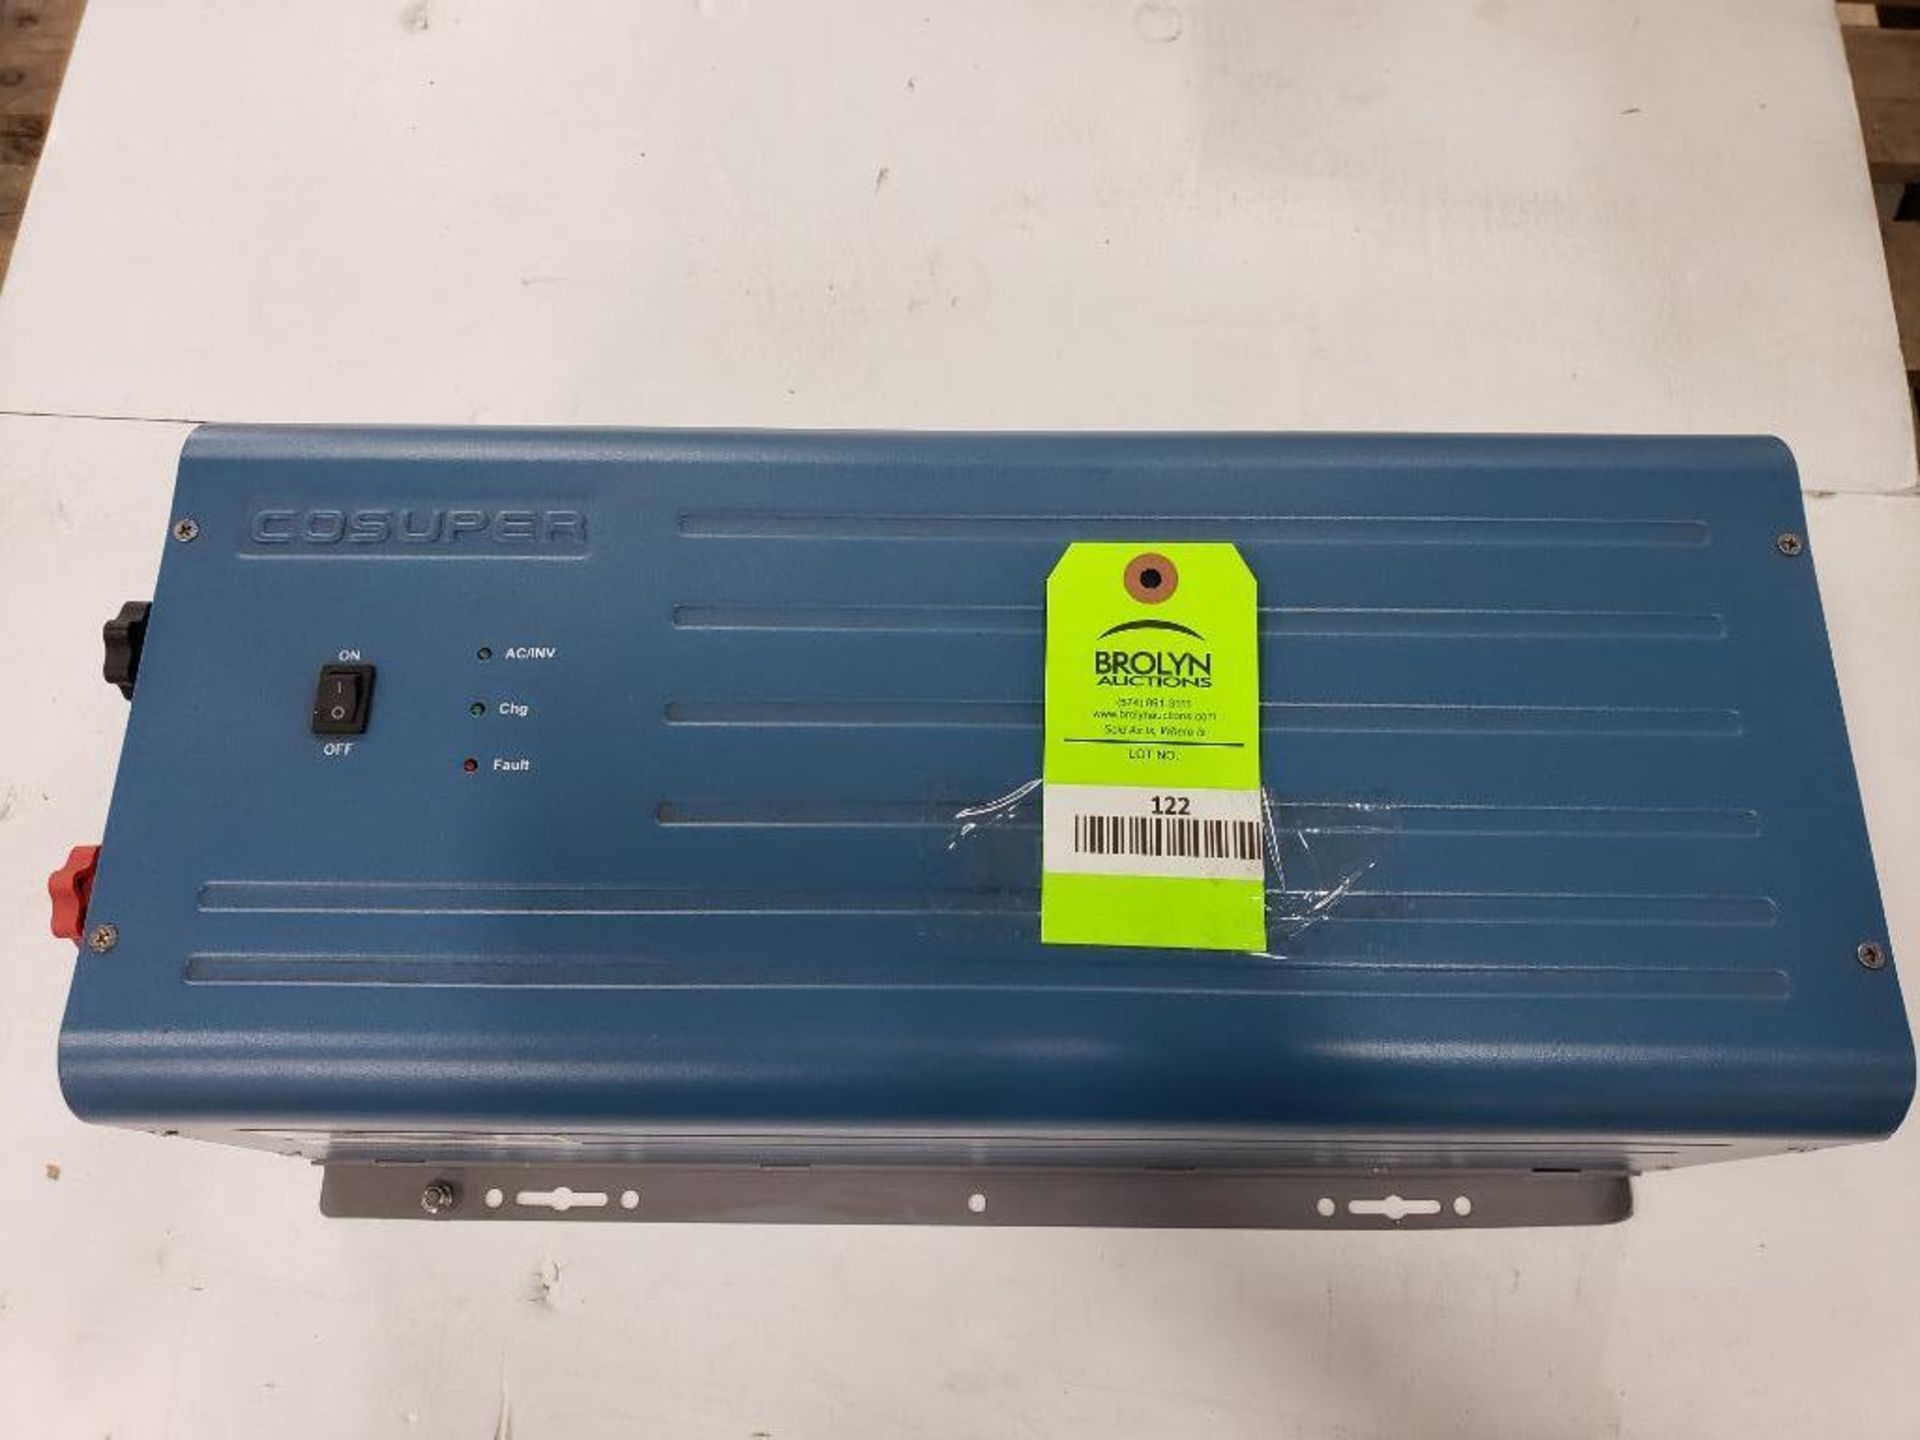 COSUPER 3000W pure sine wave inverter charger GMC3000-112.